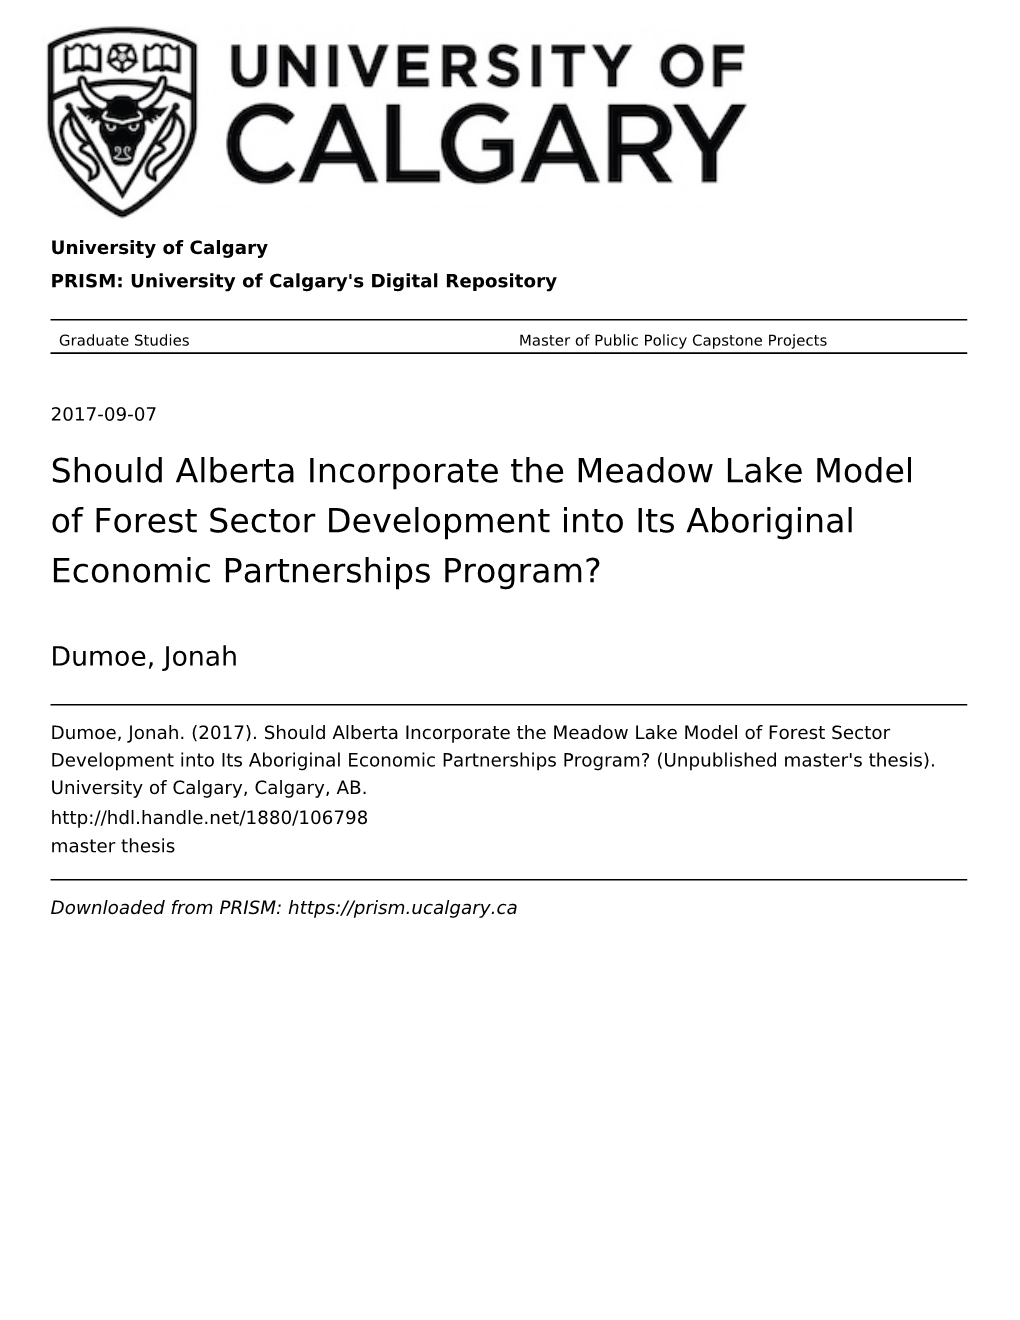 Should Alberta Incorporate the Meadow Lake Model of Forest Sector Development Into Its Aboriginal Economic Partnerships Program?